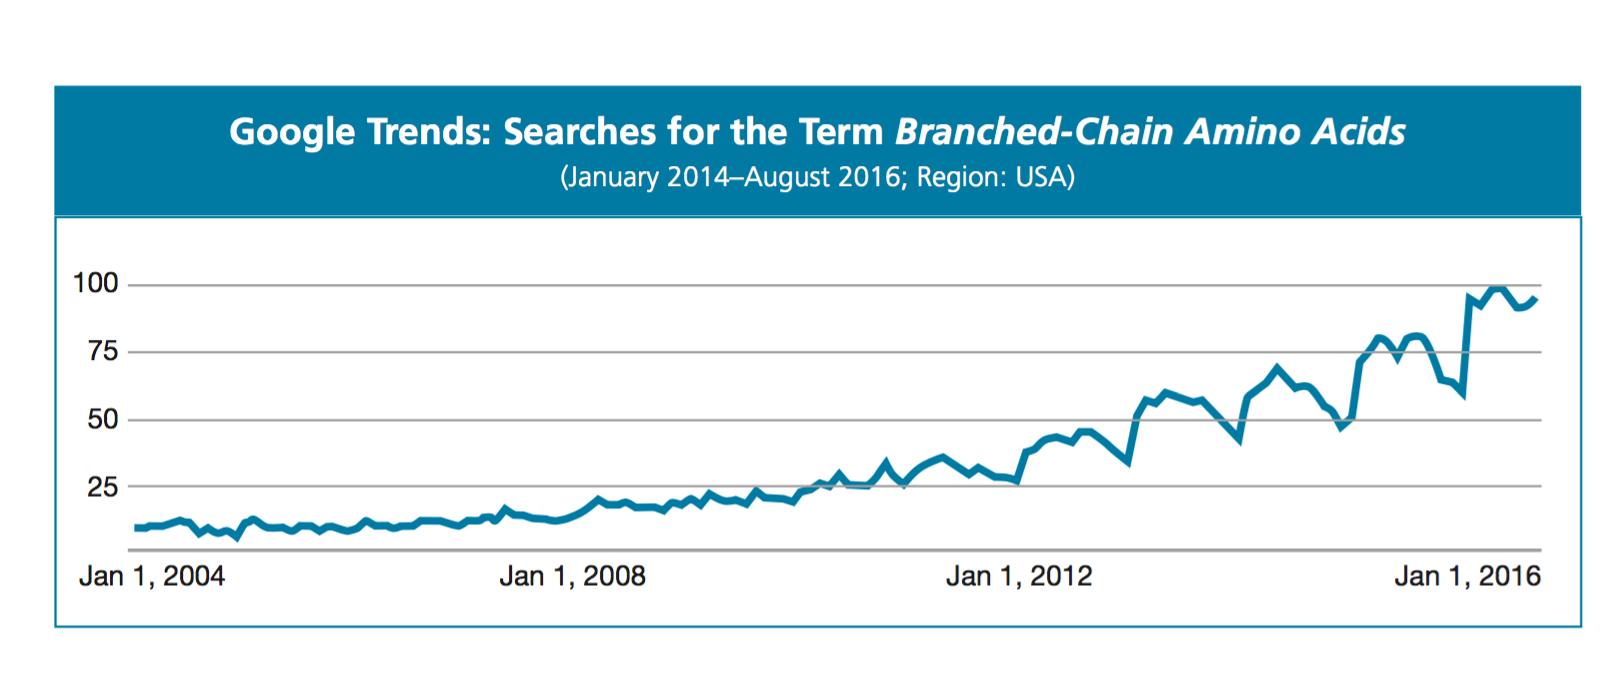 What Google Trends Says about Branched-Chain Amino Acids